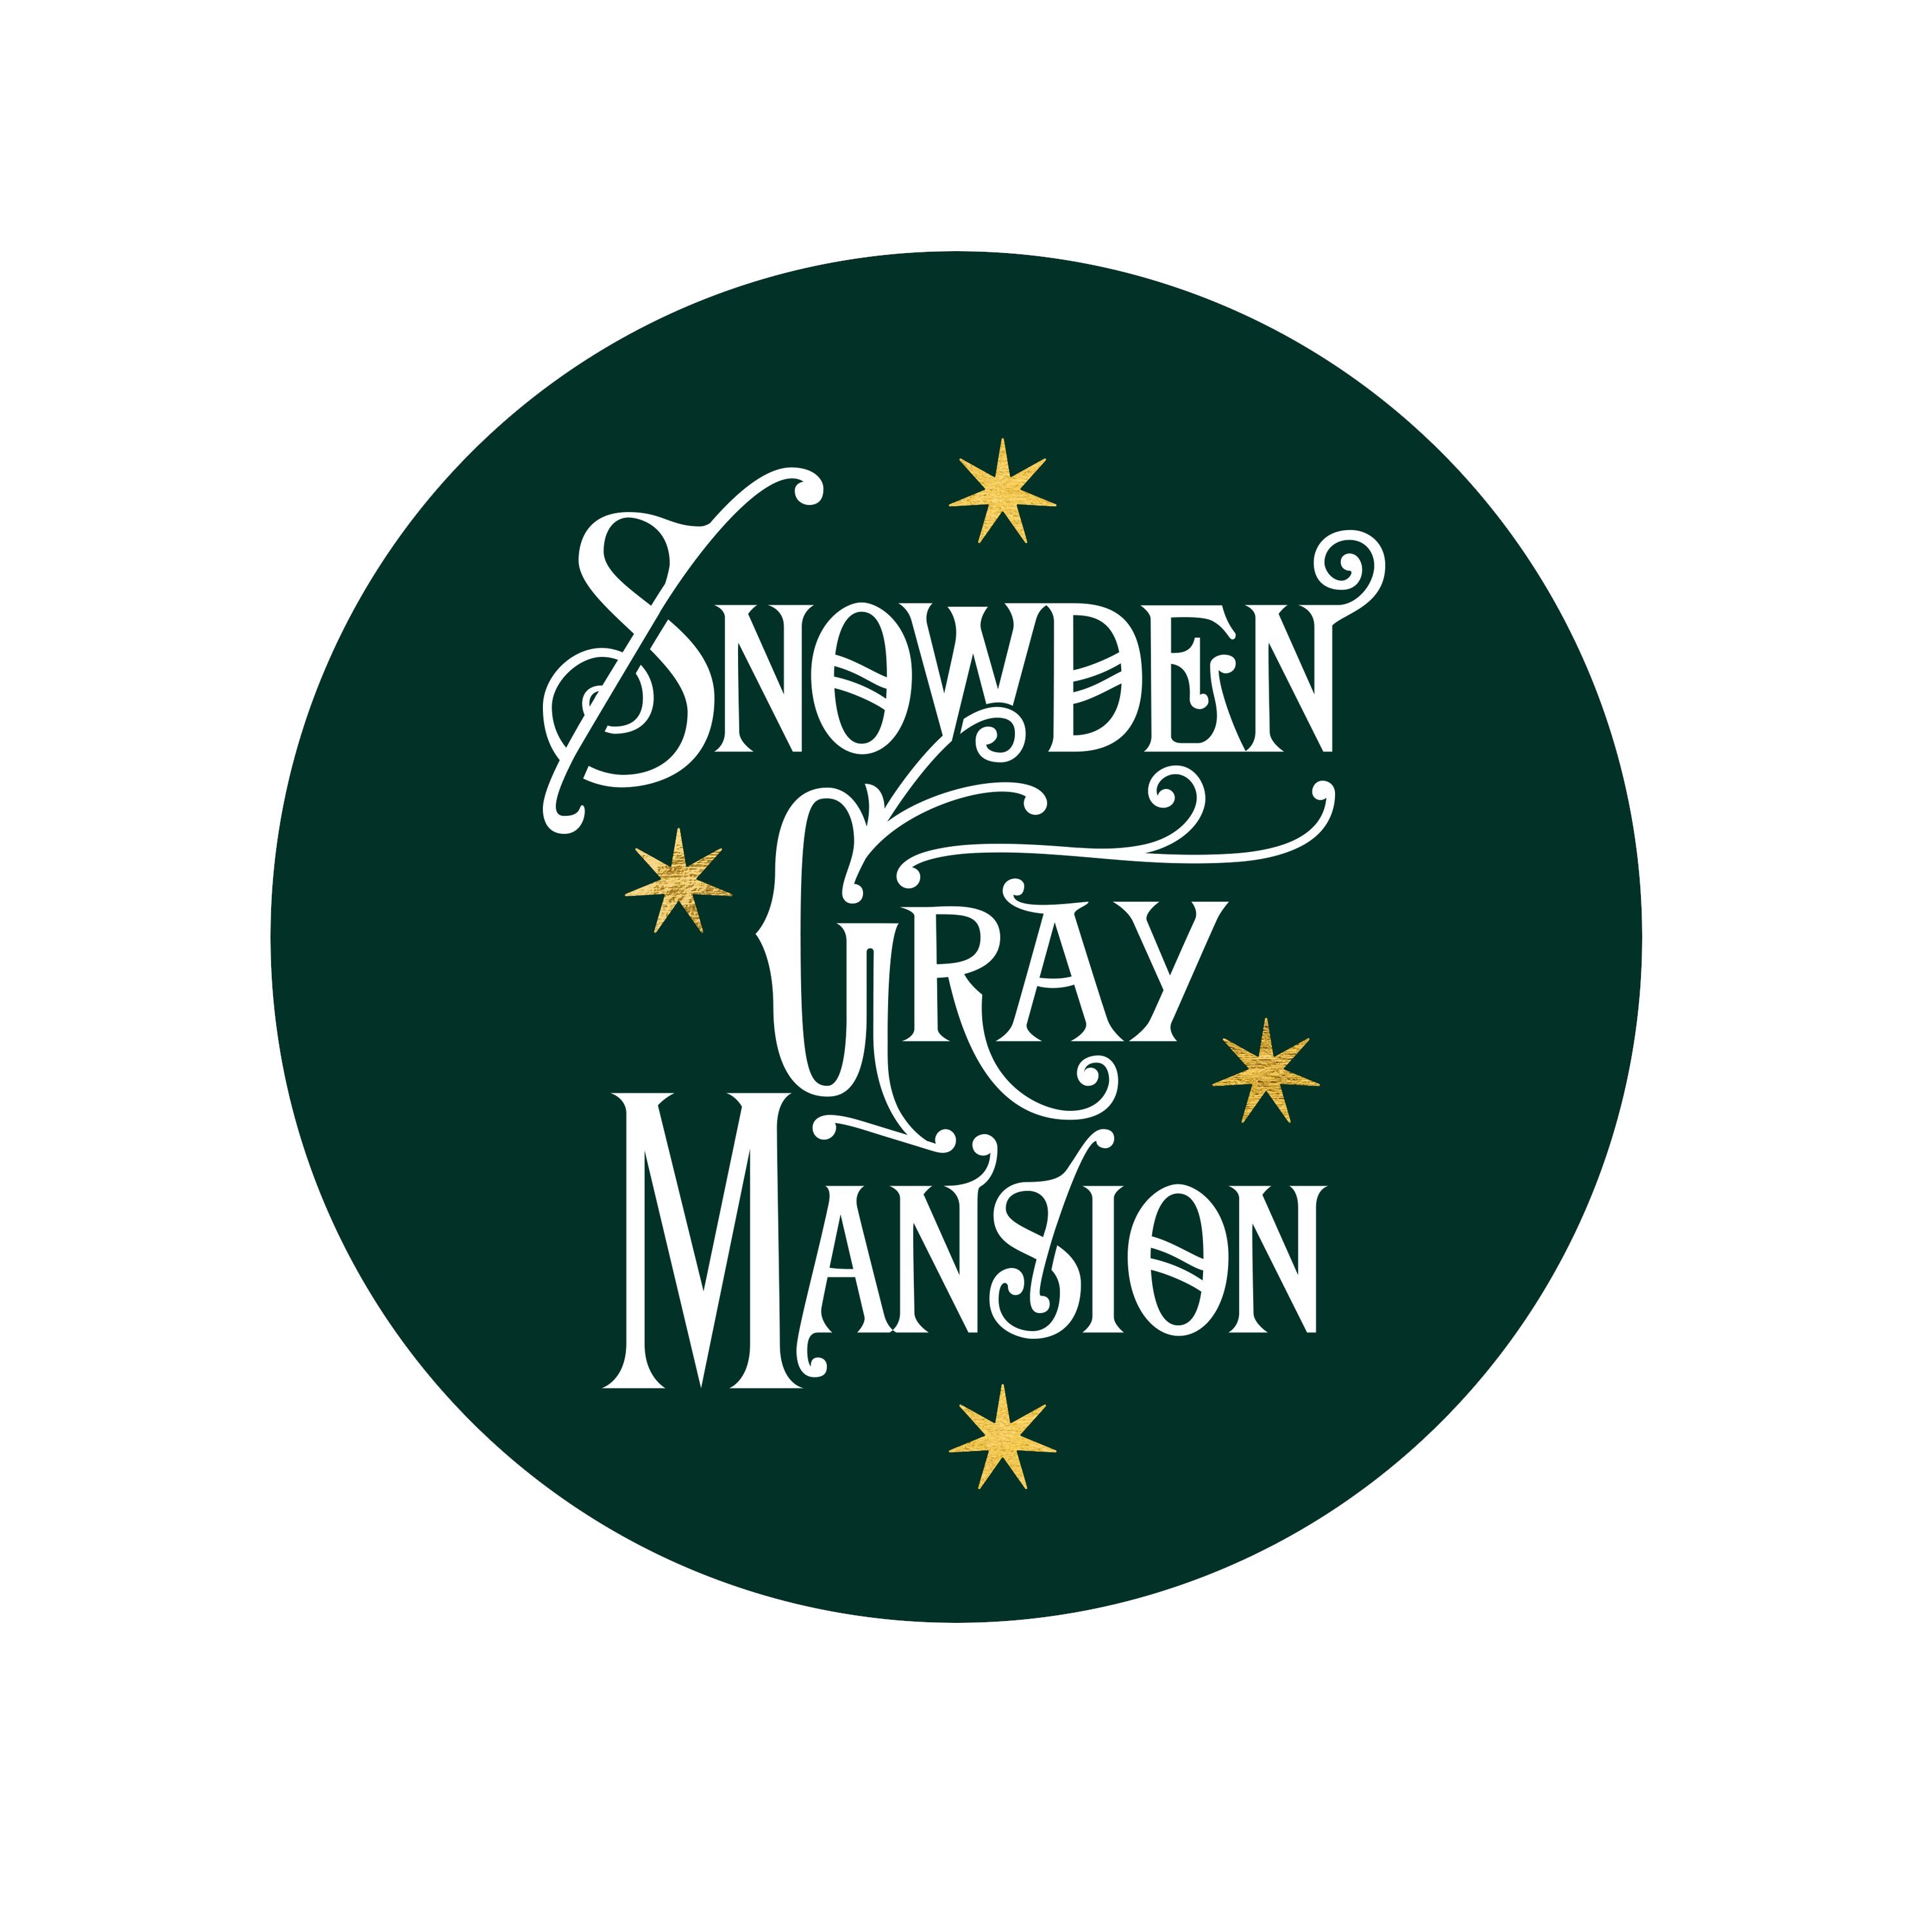 Snowden Gray Mansion is a historic private event venue and performance space located in downtown Columbus.